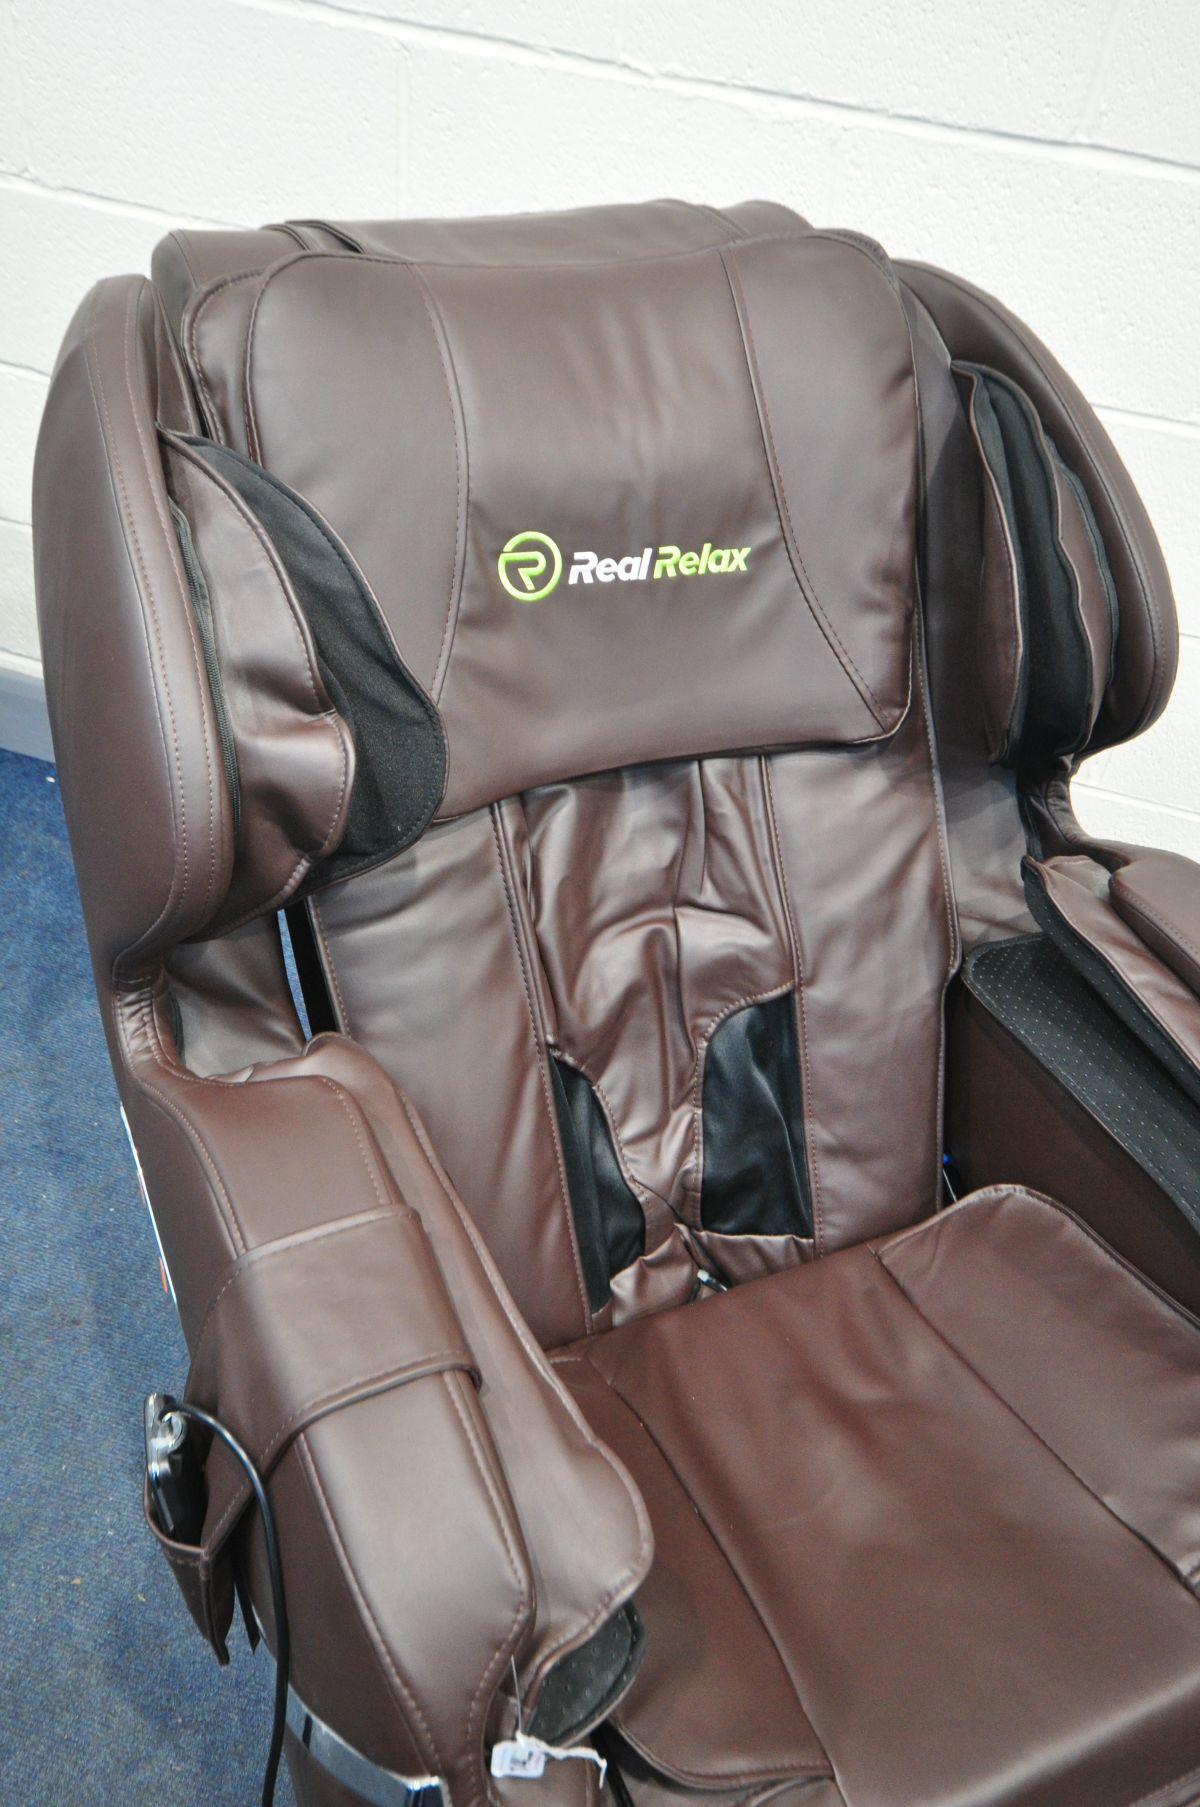 A REAL RELAX FAVOR-03 BROWN LEATHERETTE MASSAGE CHAIR - Image 2 of 3